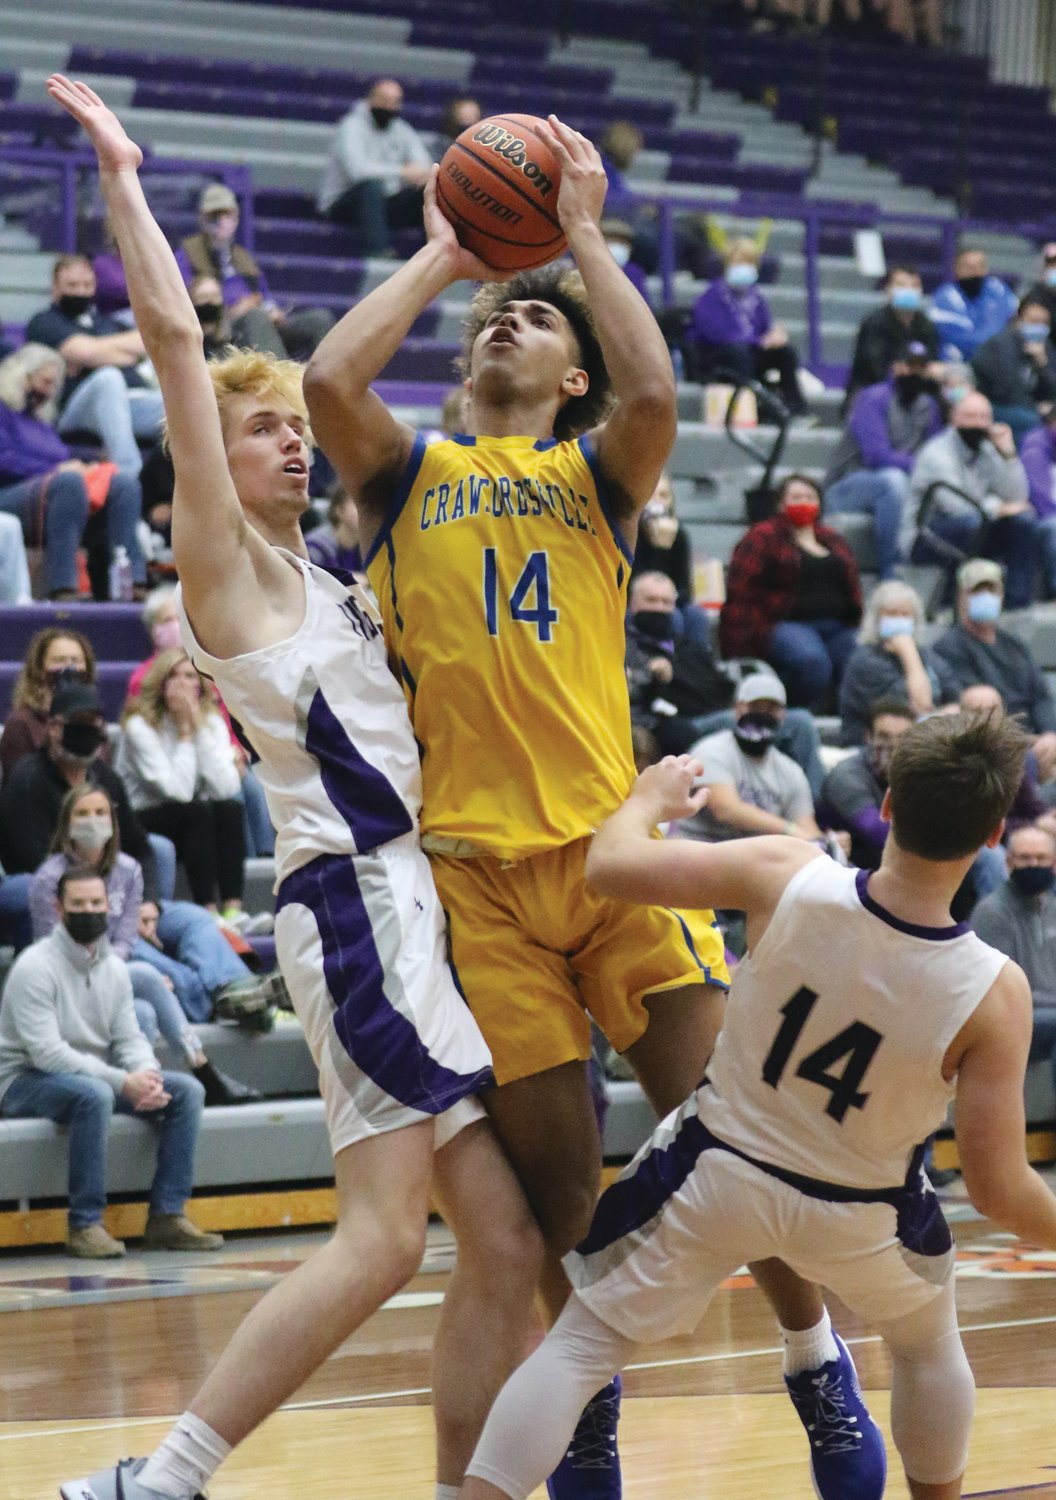 Senior Jesse Hall contributed 15 points in Crawfordsville’s 72-63 win over Greencastle on Tuesday.